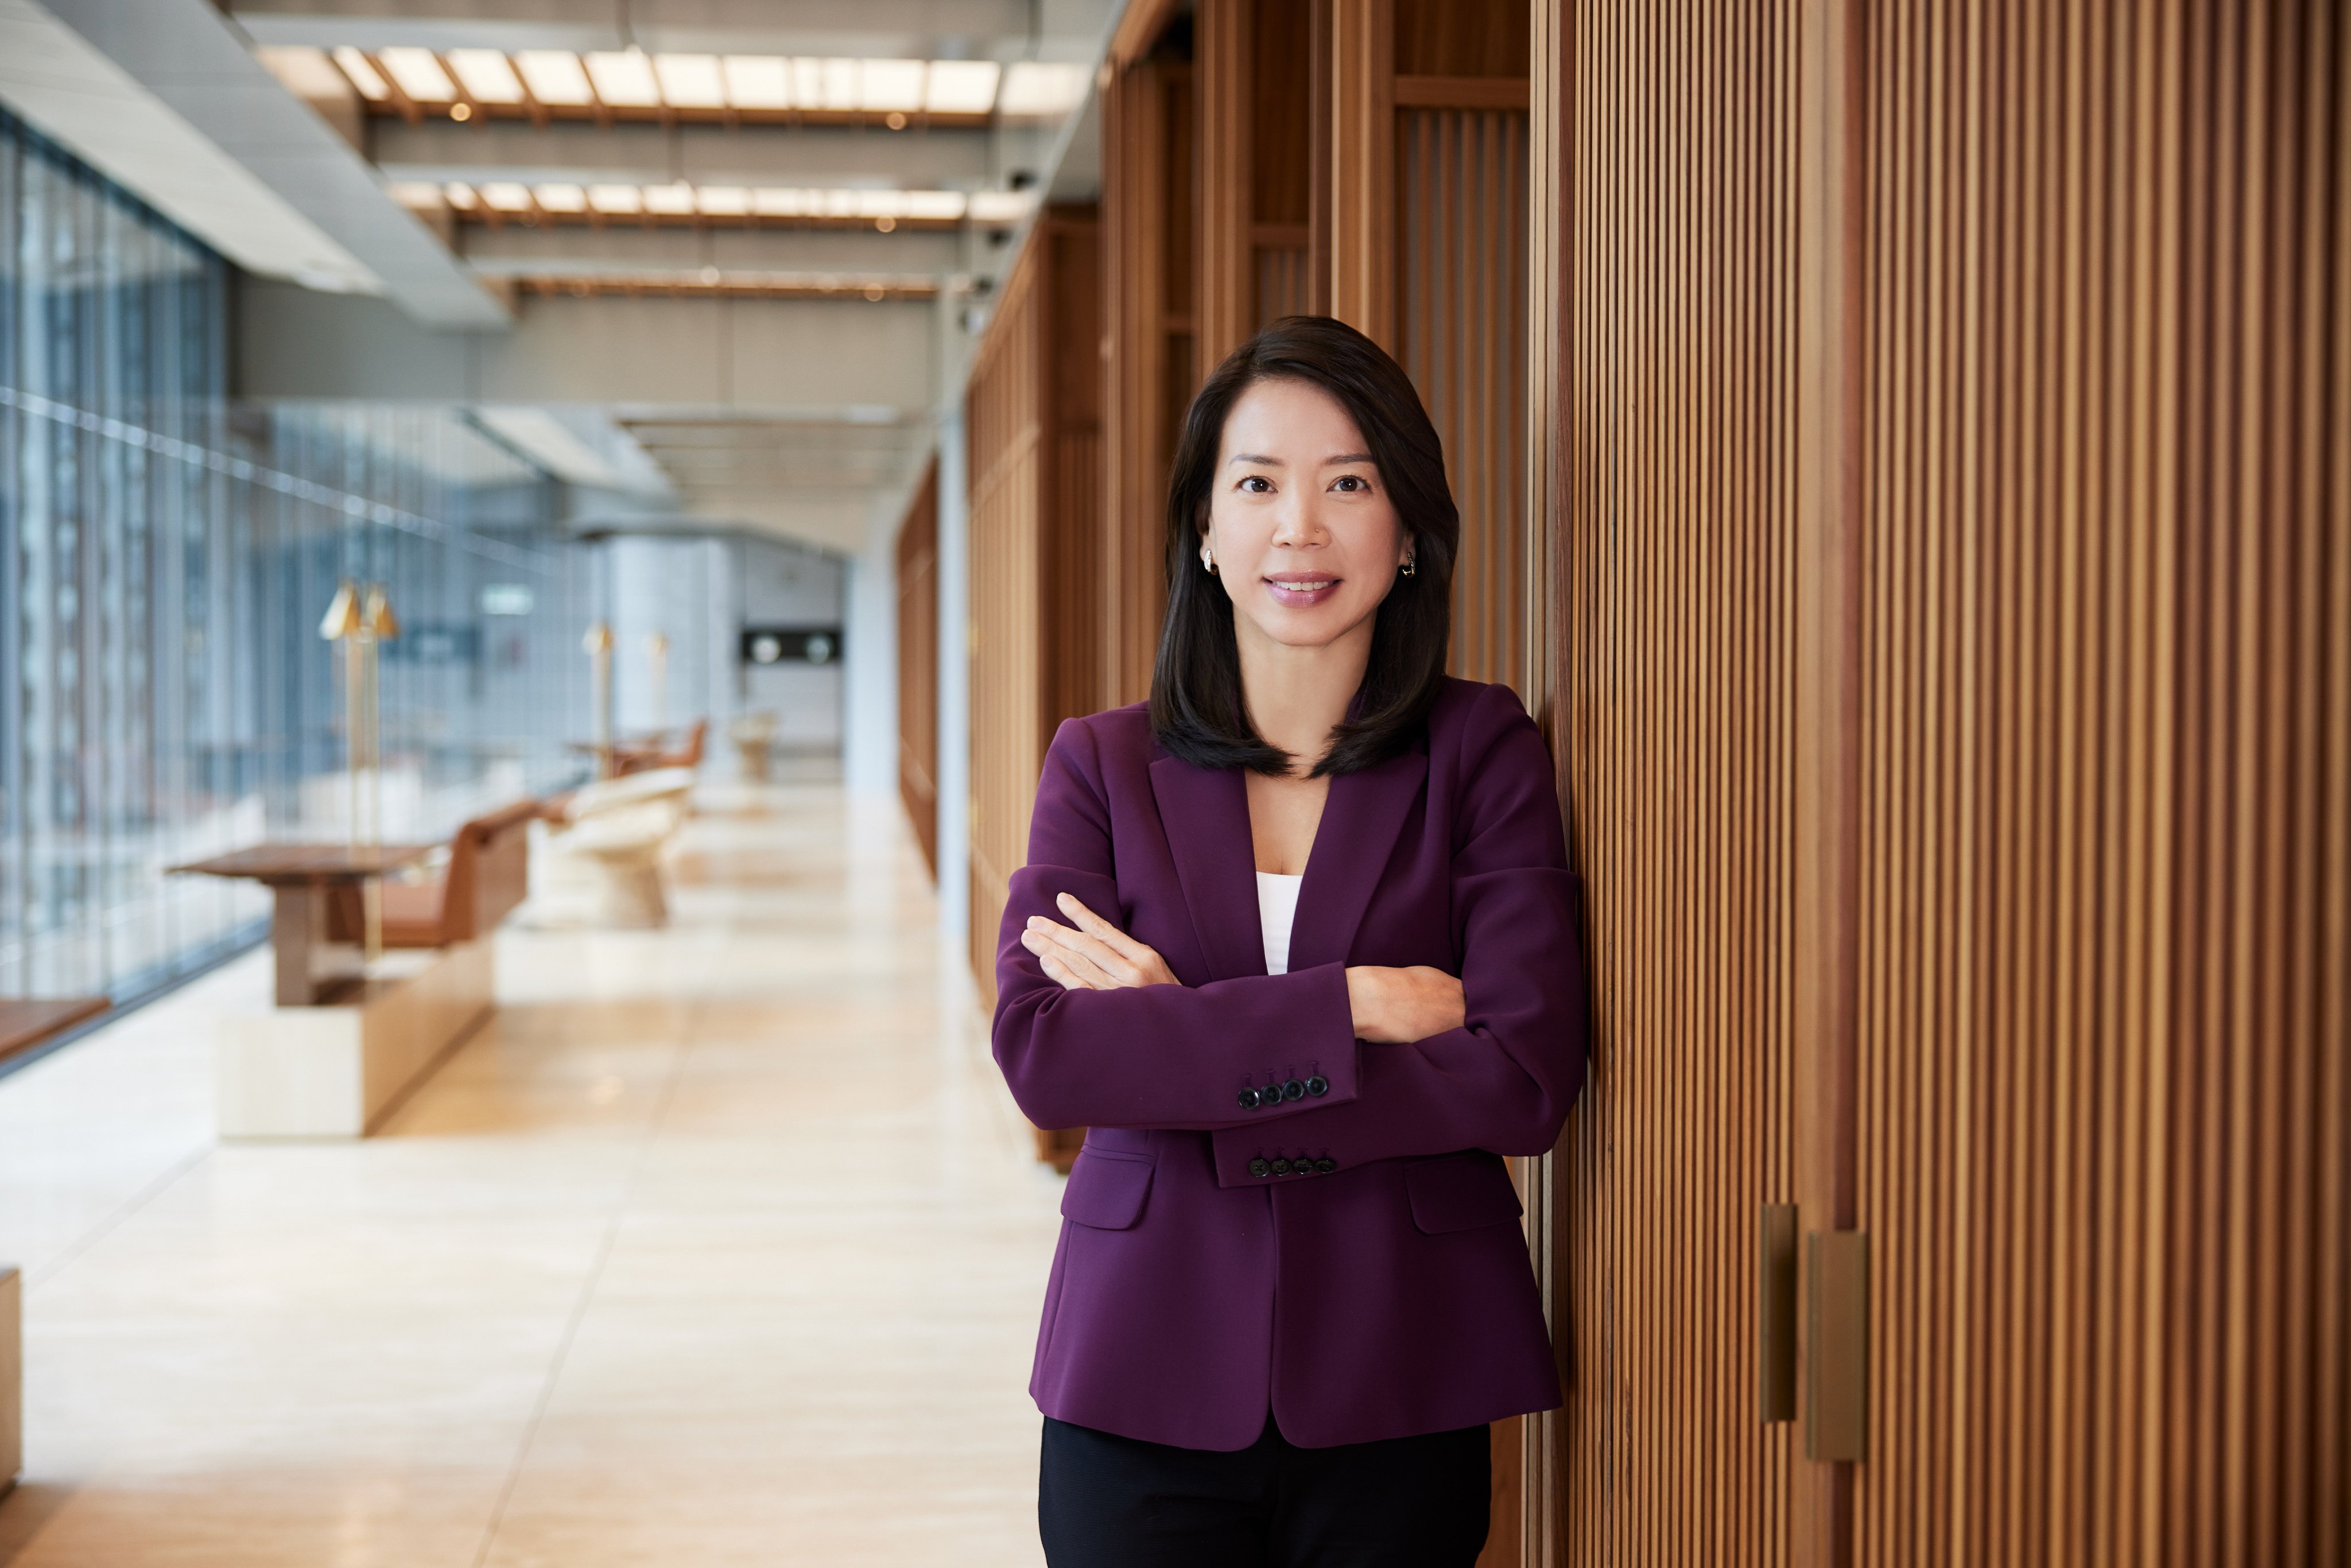 Luanne Lim, CEO, Hong Kong, HSBC, says fintech gave the bank both the capability and resilience to offer its full range of services to clients during the Covid-19 pandemic.